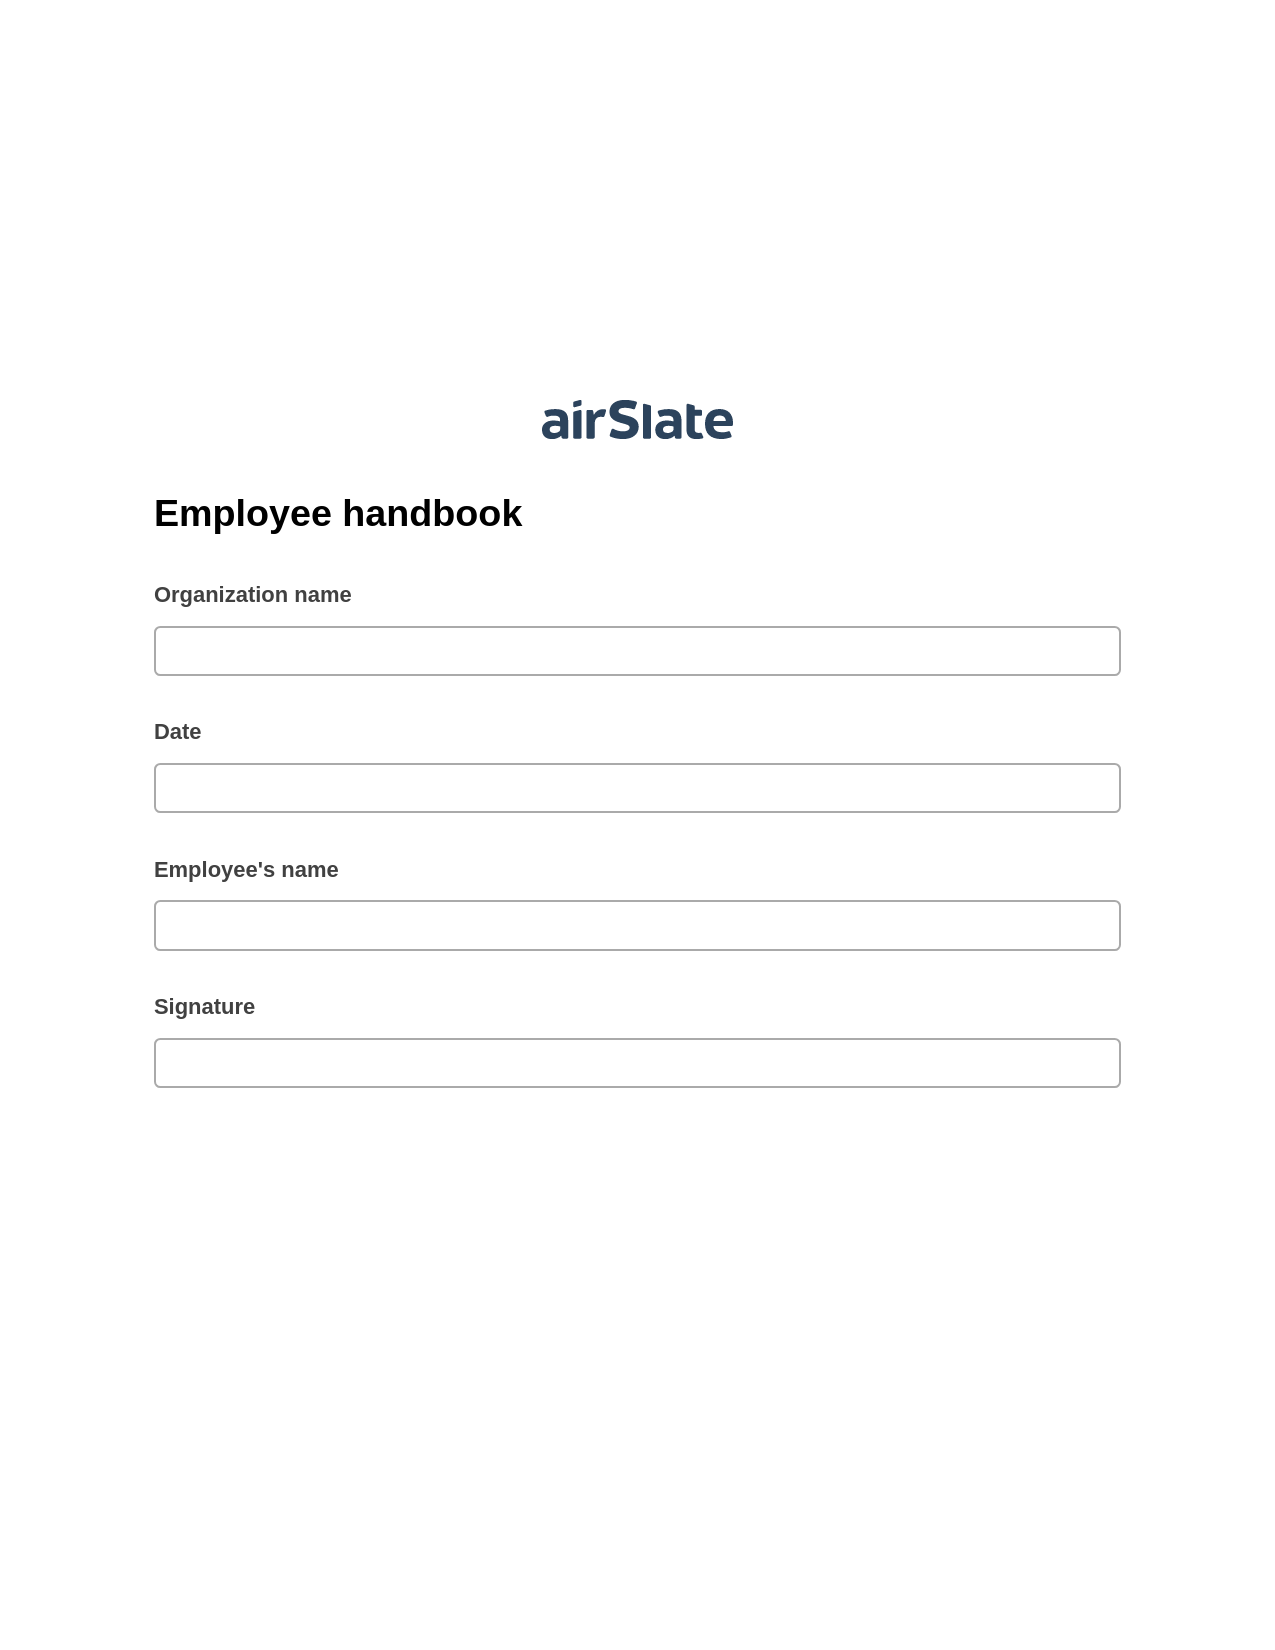 Employee handbook Pre-fill from Salesforce Records with SOQL Bot, Create Slate Reminder Bot, Export to Smartsheet